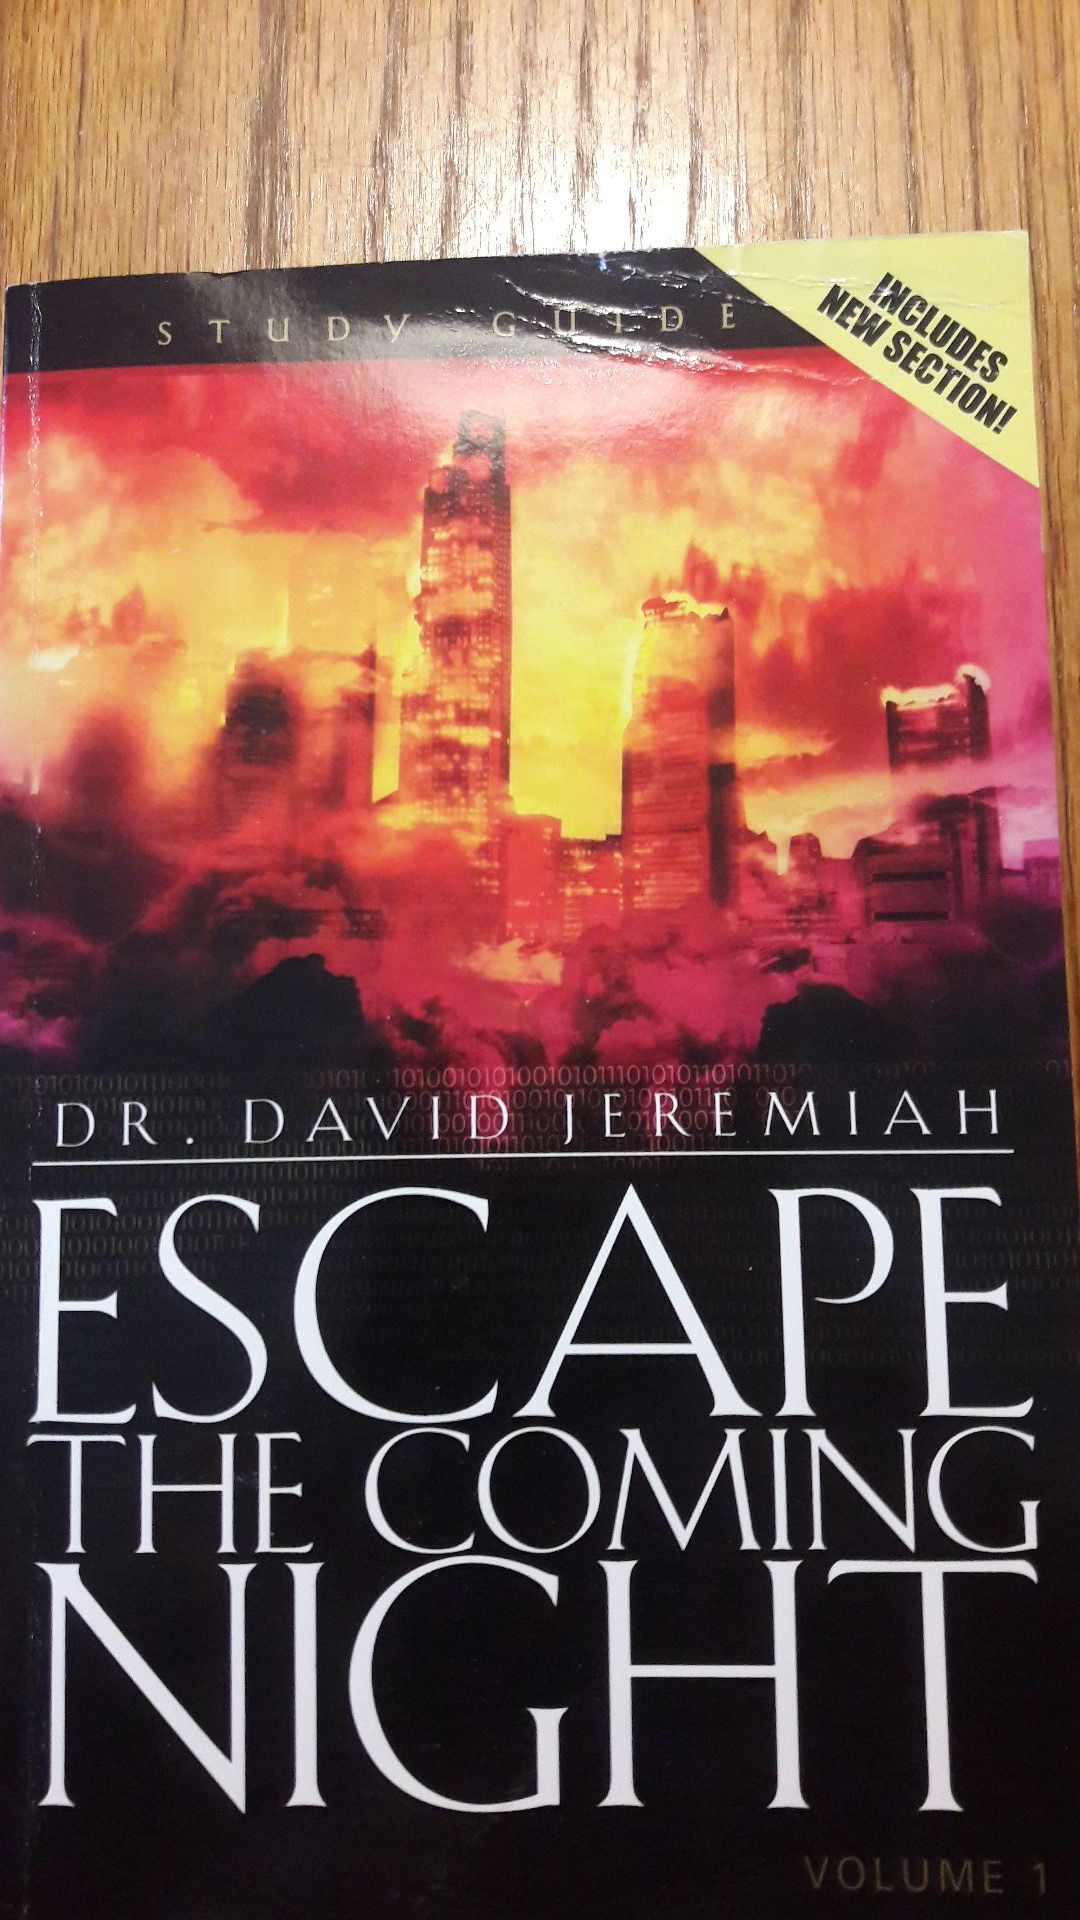 ESCAPE THE COMING NIGHT BOOK BY DR. DAVID JEREMIAH